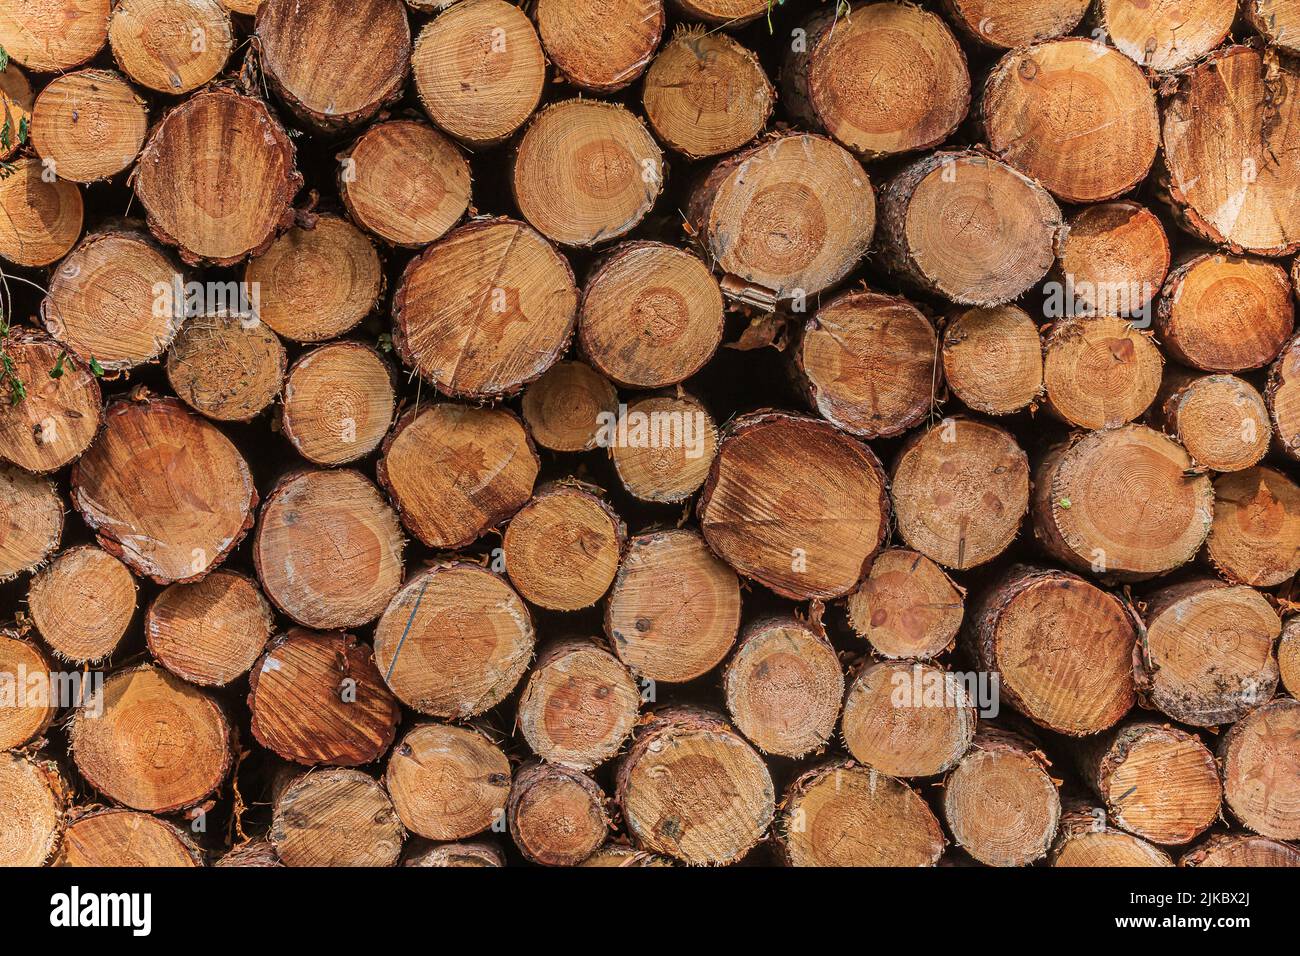 Stacks of logs a day. Stacked pine trunks after felling. Sorted wood at harvest time. Many sawed logs with visible growth rings. reddish orange color Stock Photo